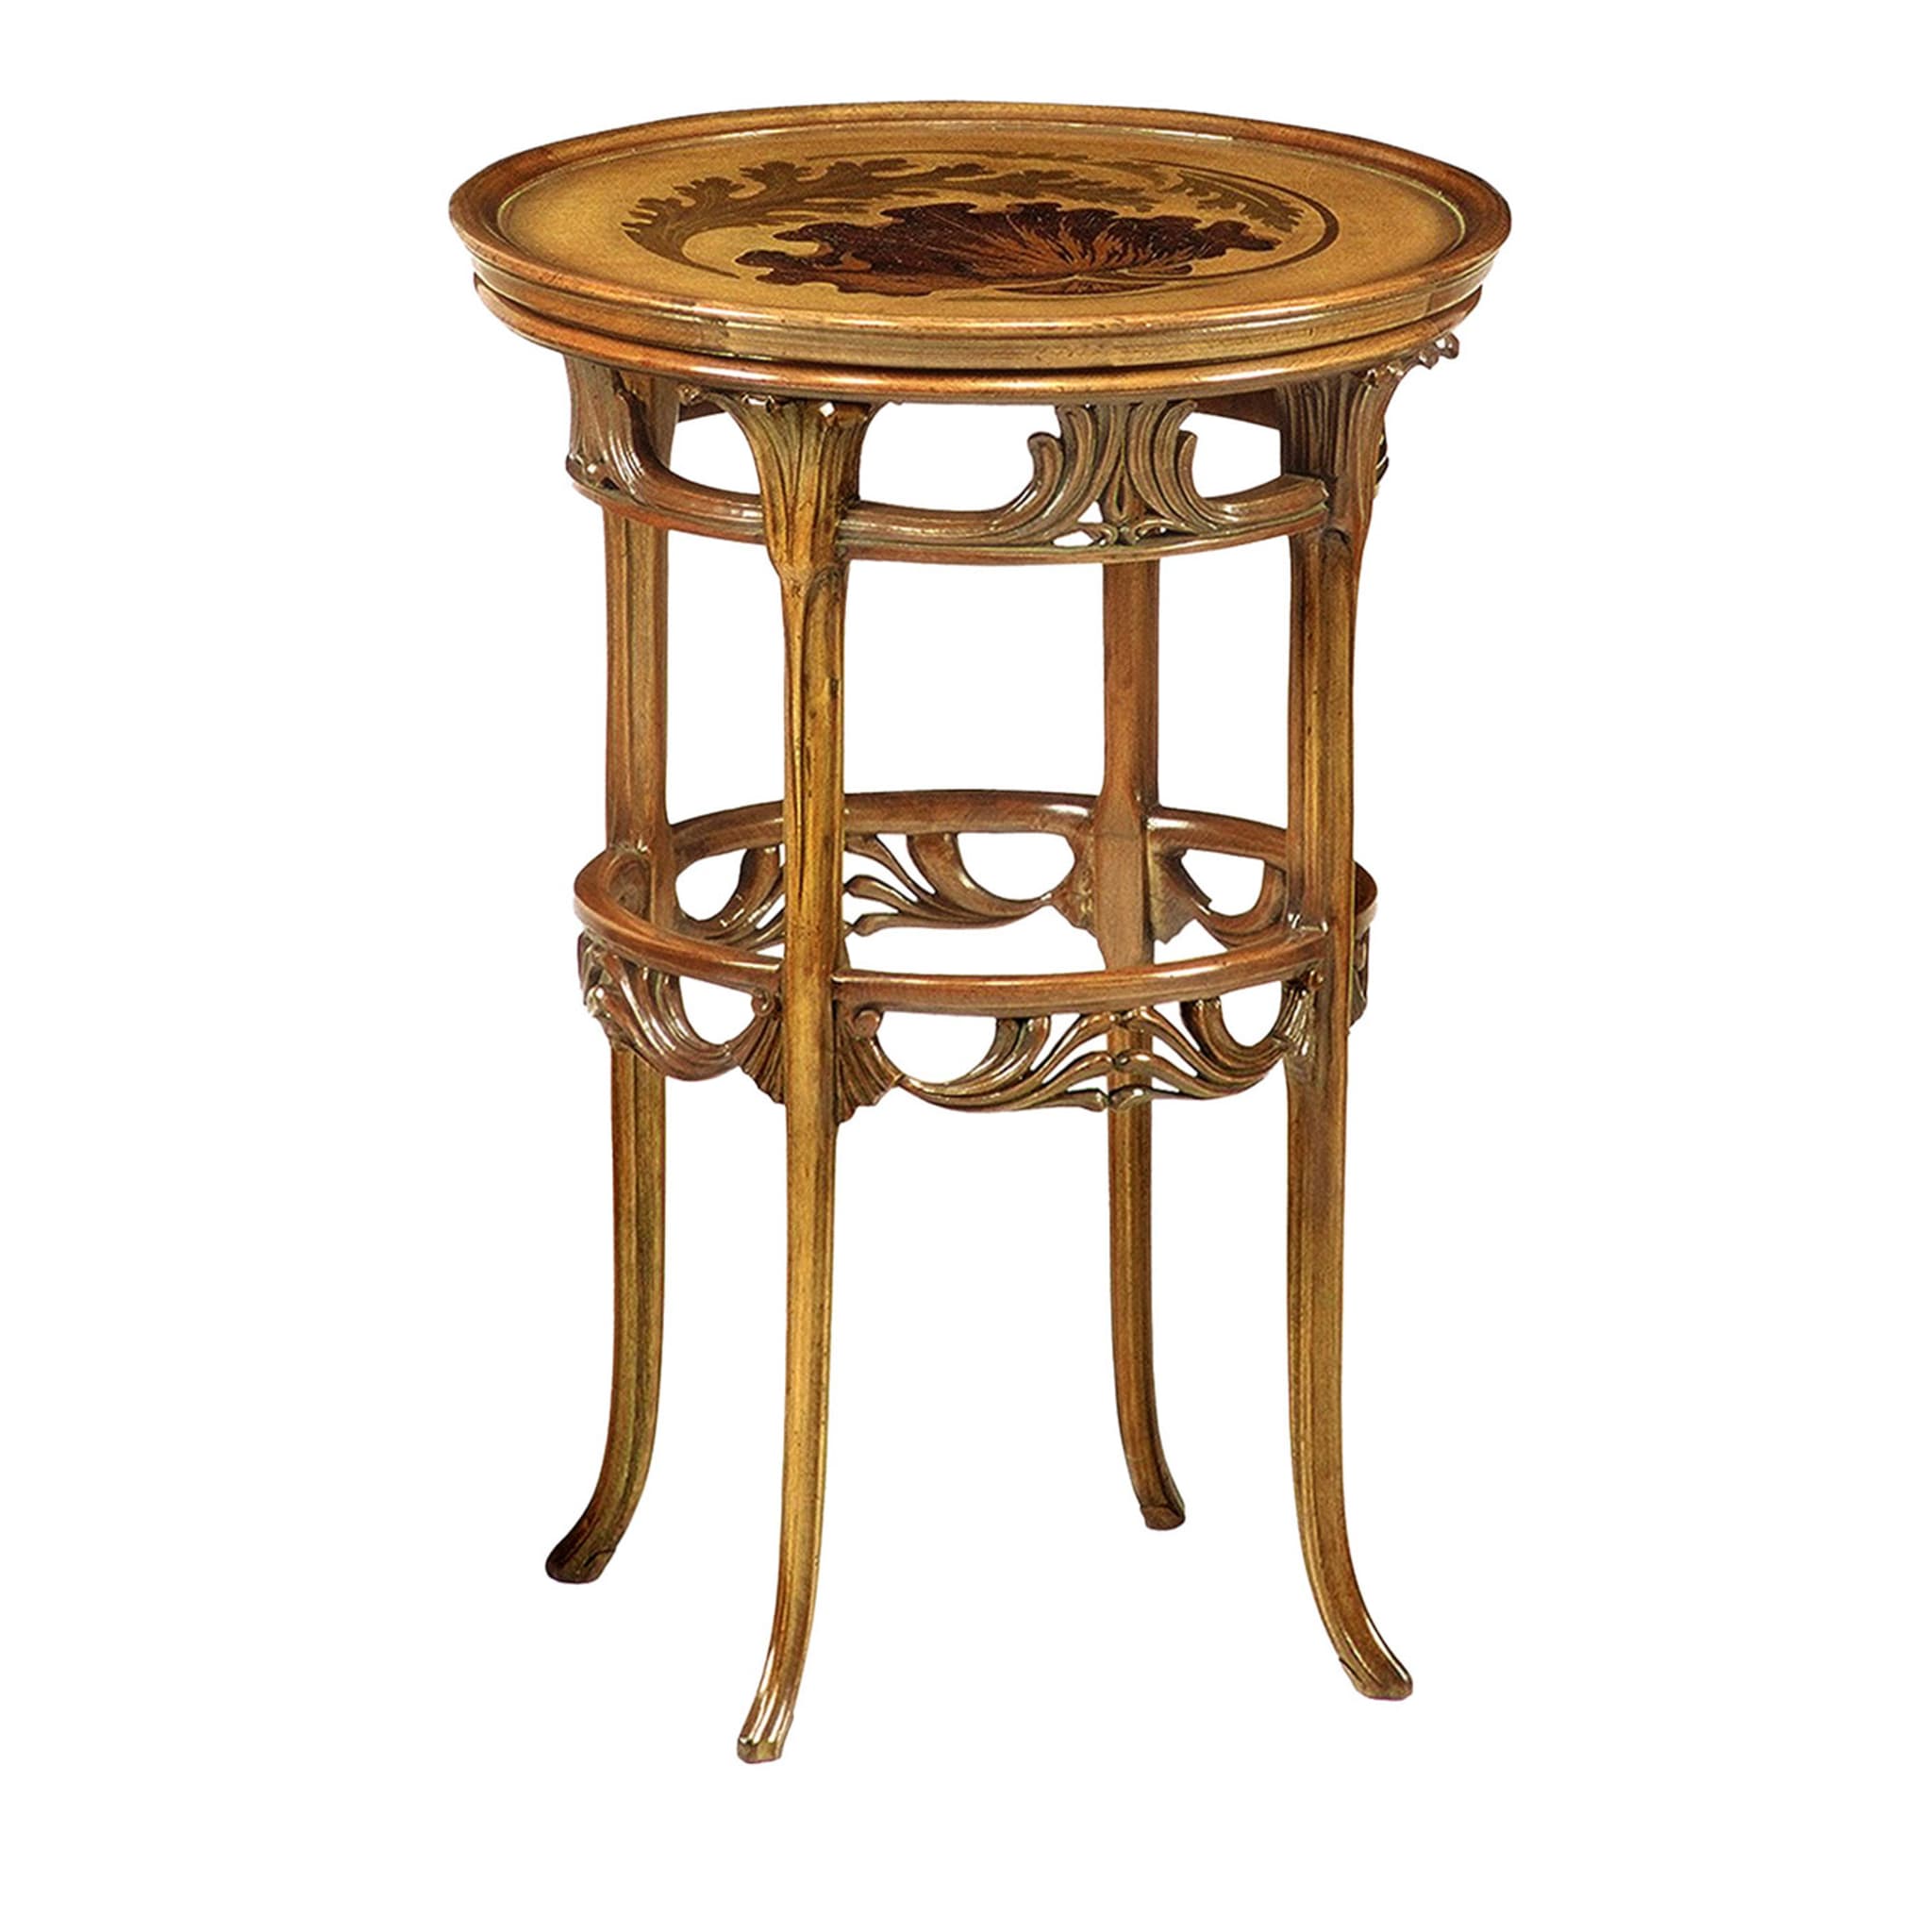 French Art Nouveau-Style Inlaid Side Table by Ernesto Basile - Main view